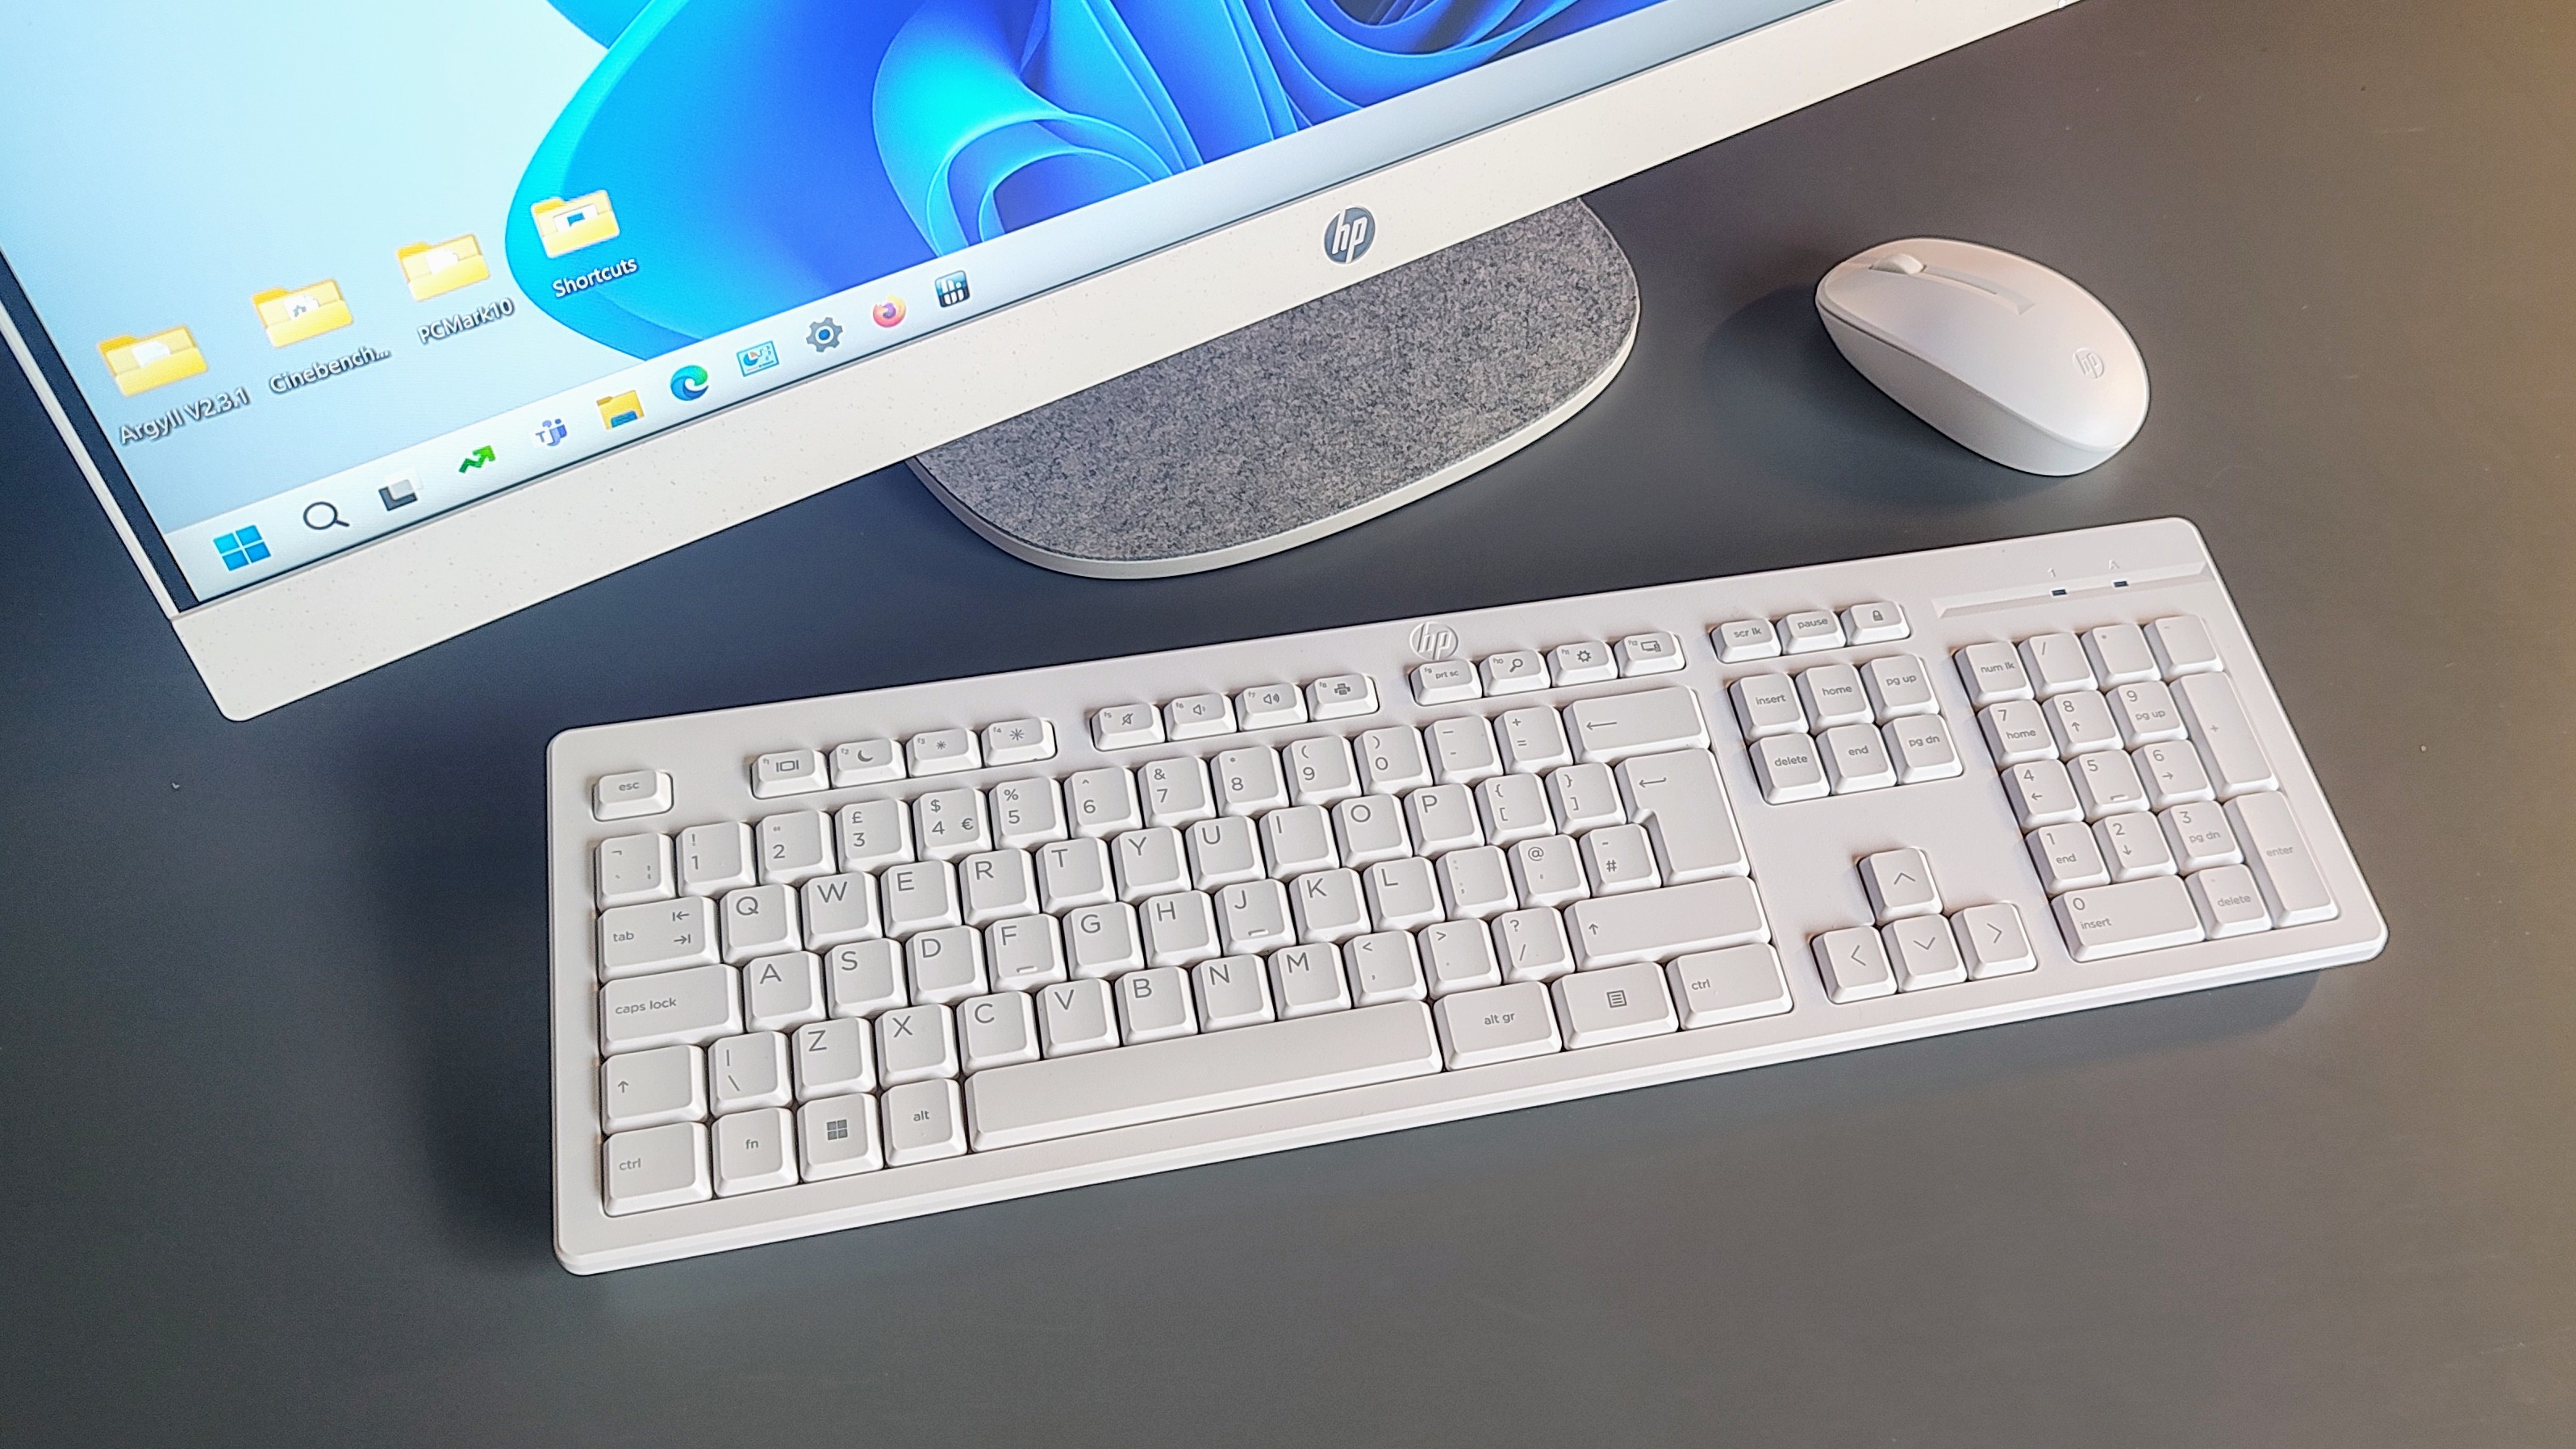 The HP All-in-one 27's keyboard and mouse